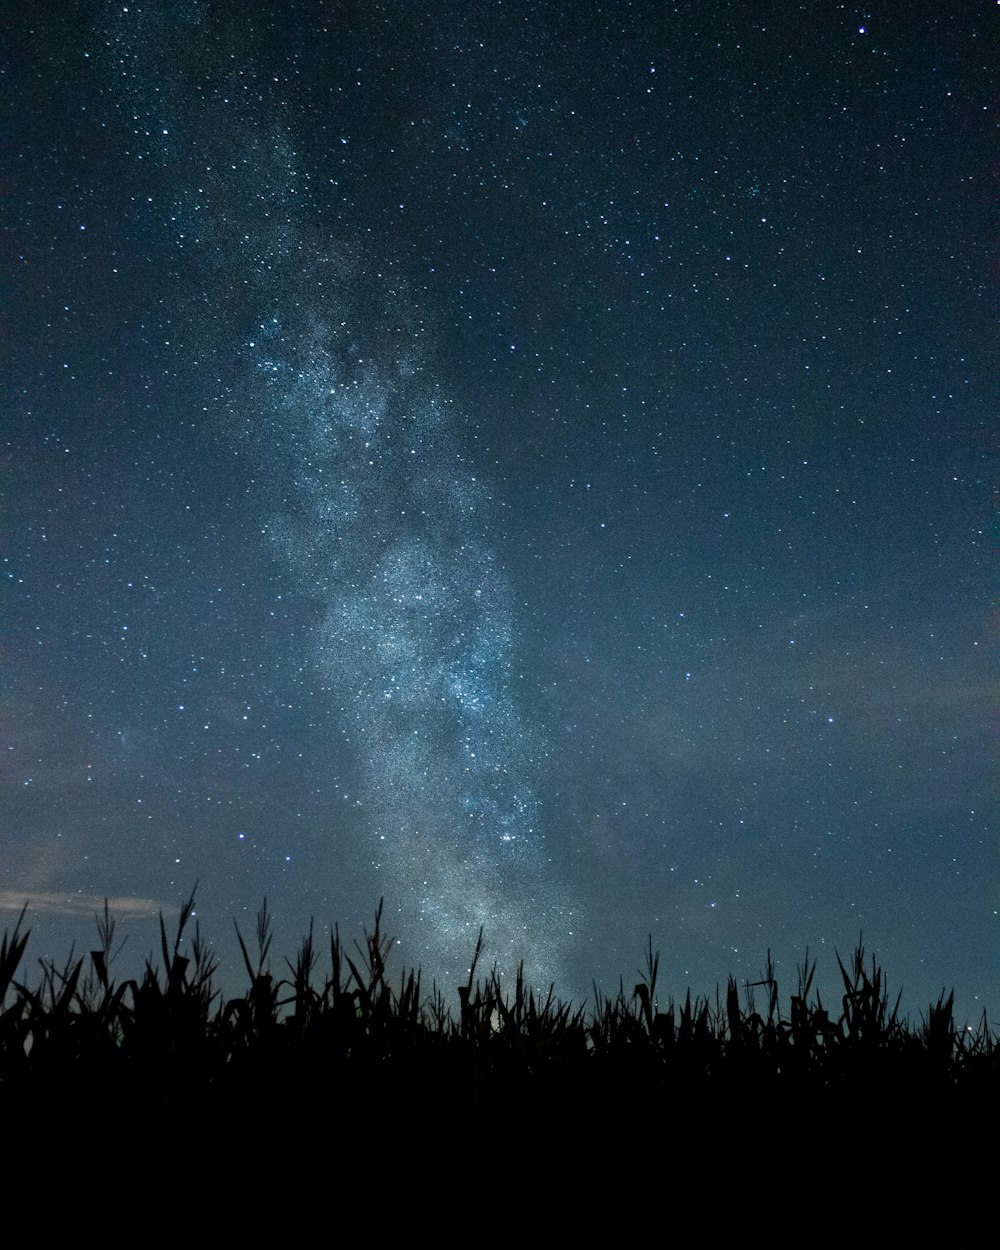 the night sky is filled with stars above a cornfield